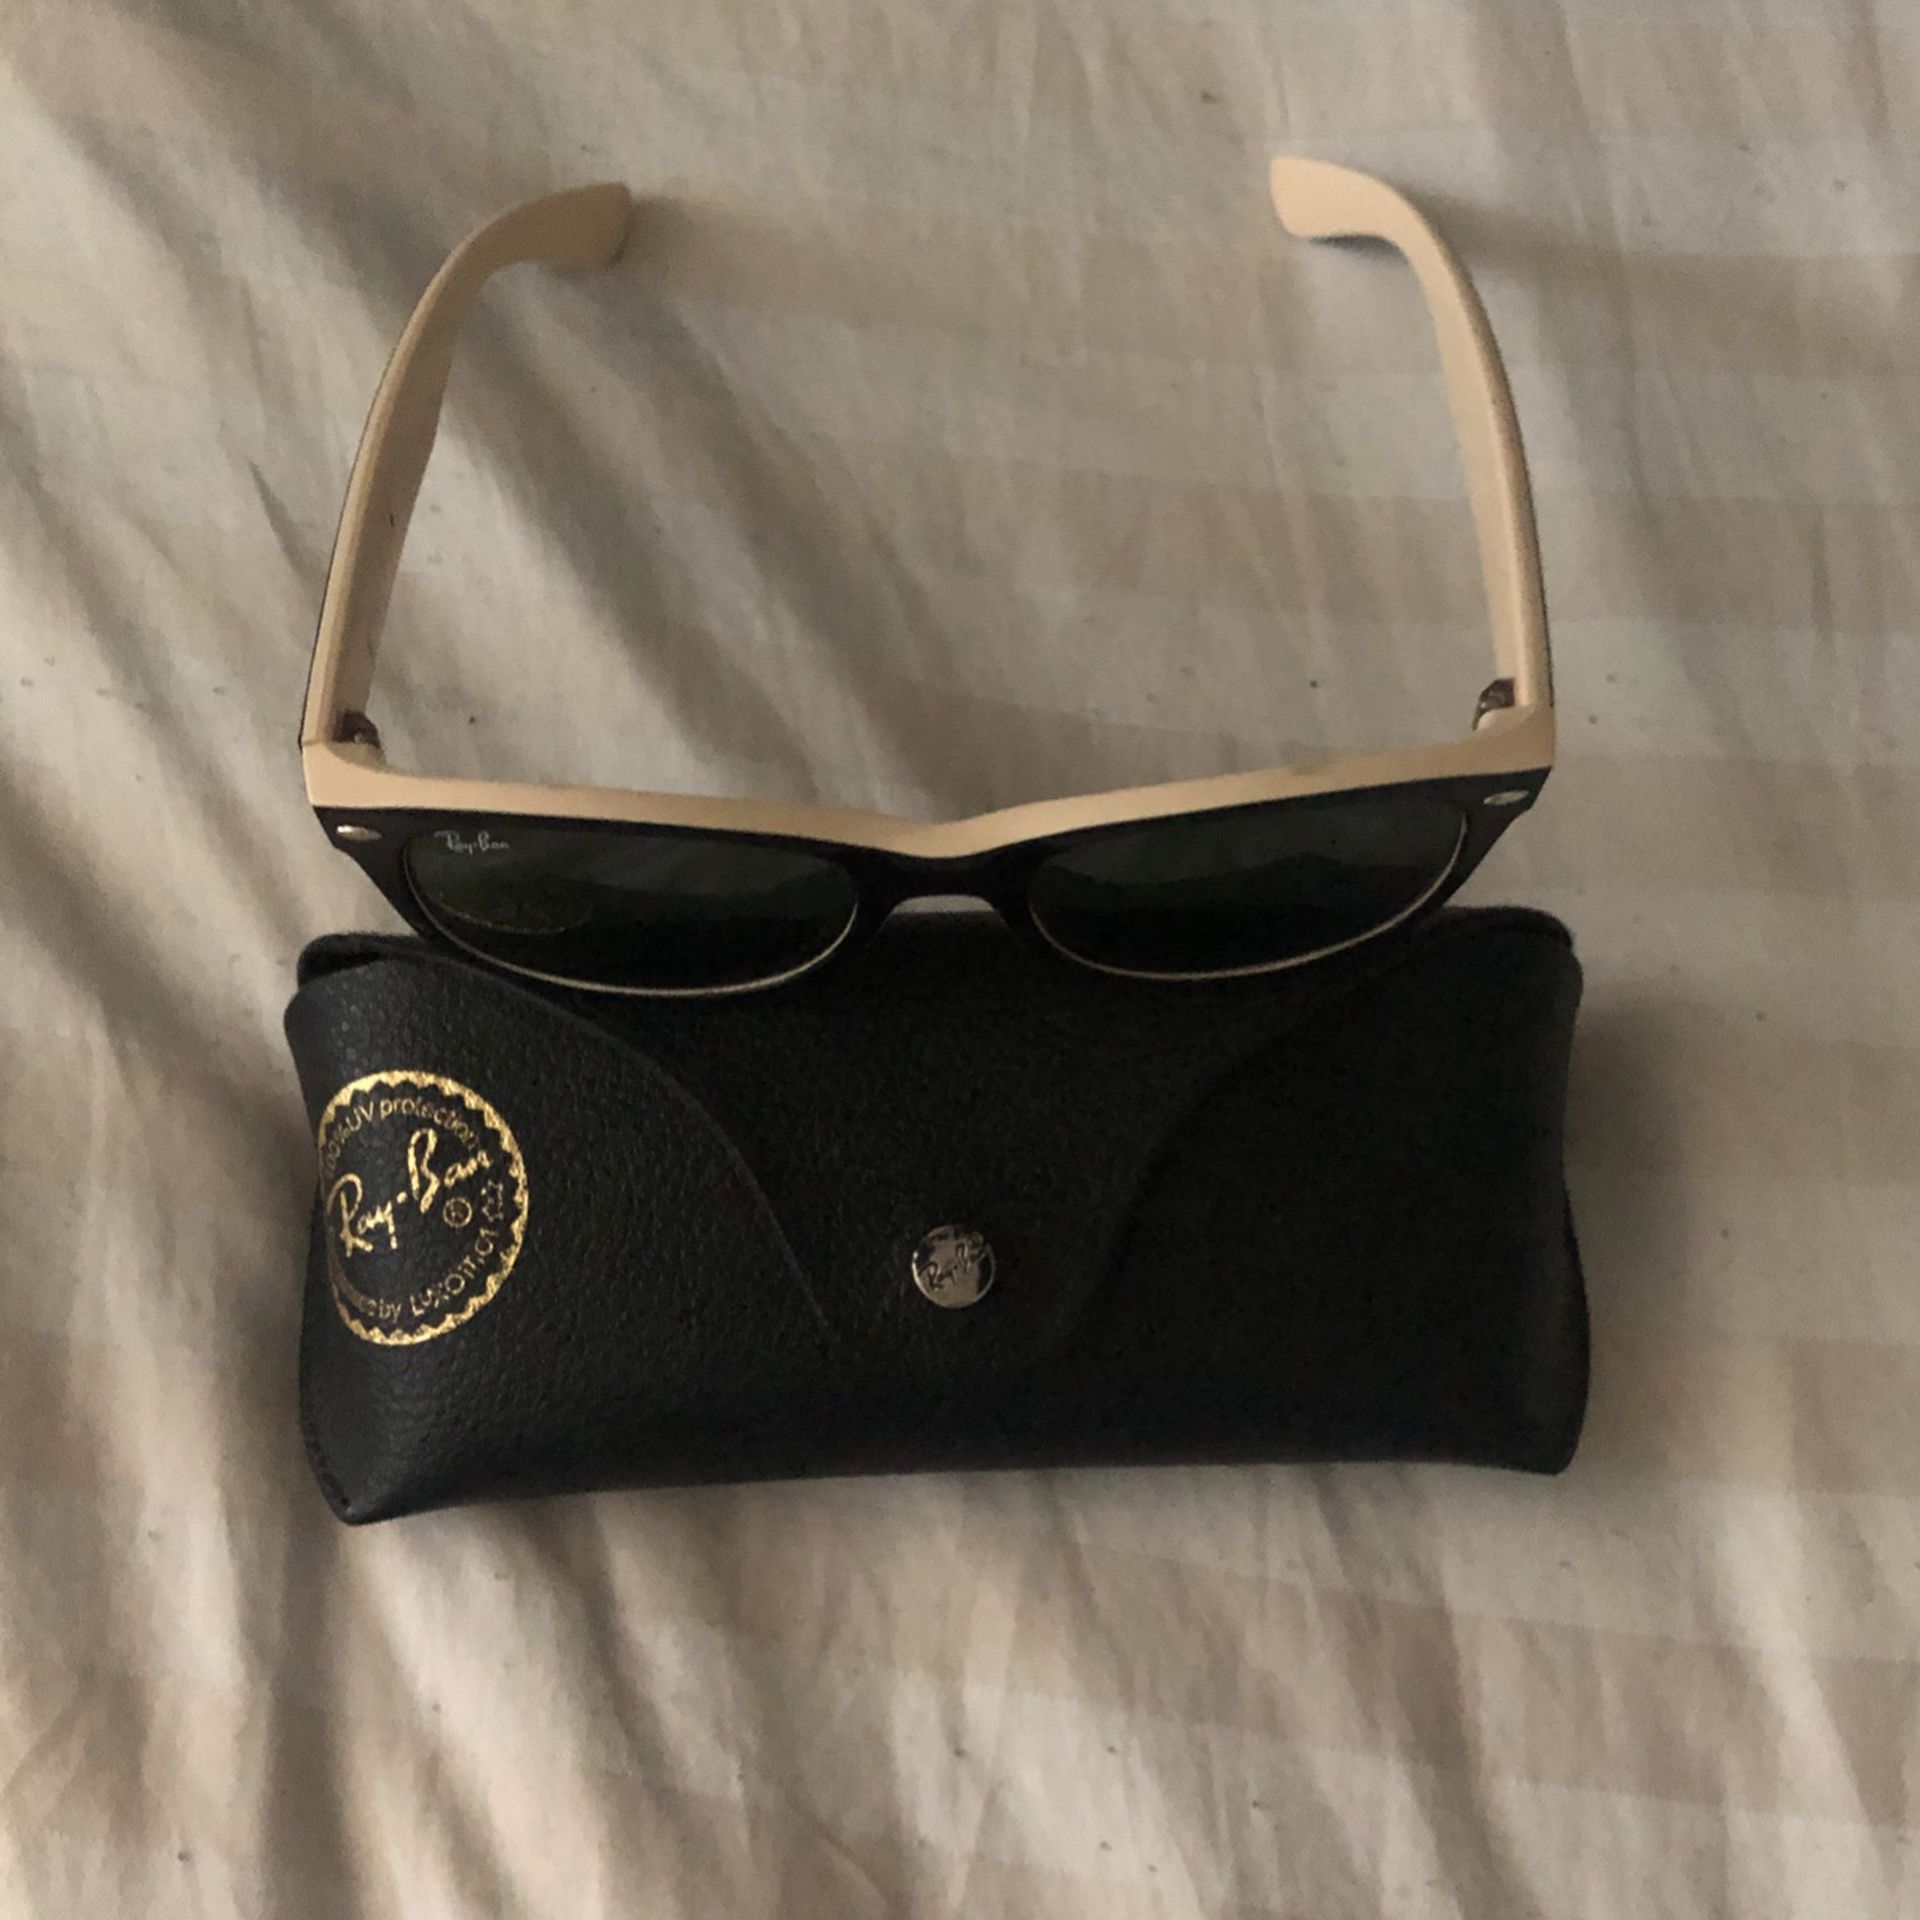 Chanel magnetic sunglasses for Sale in Los Angeles, CA - OfferUp